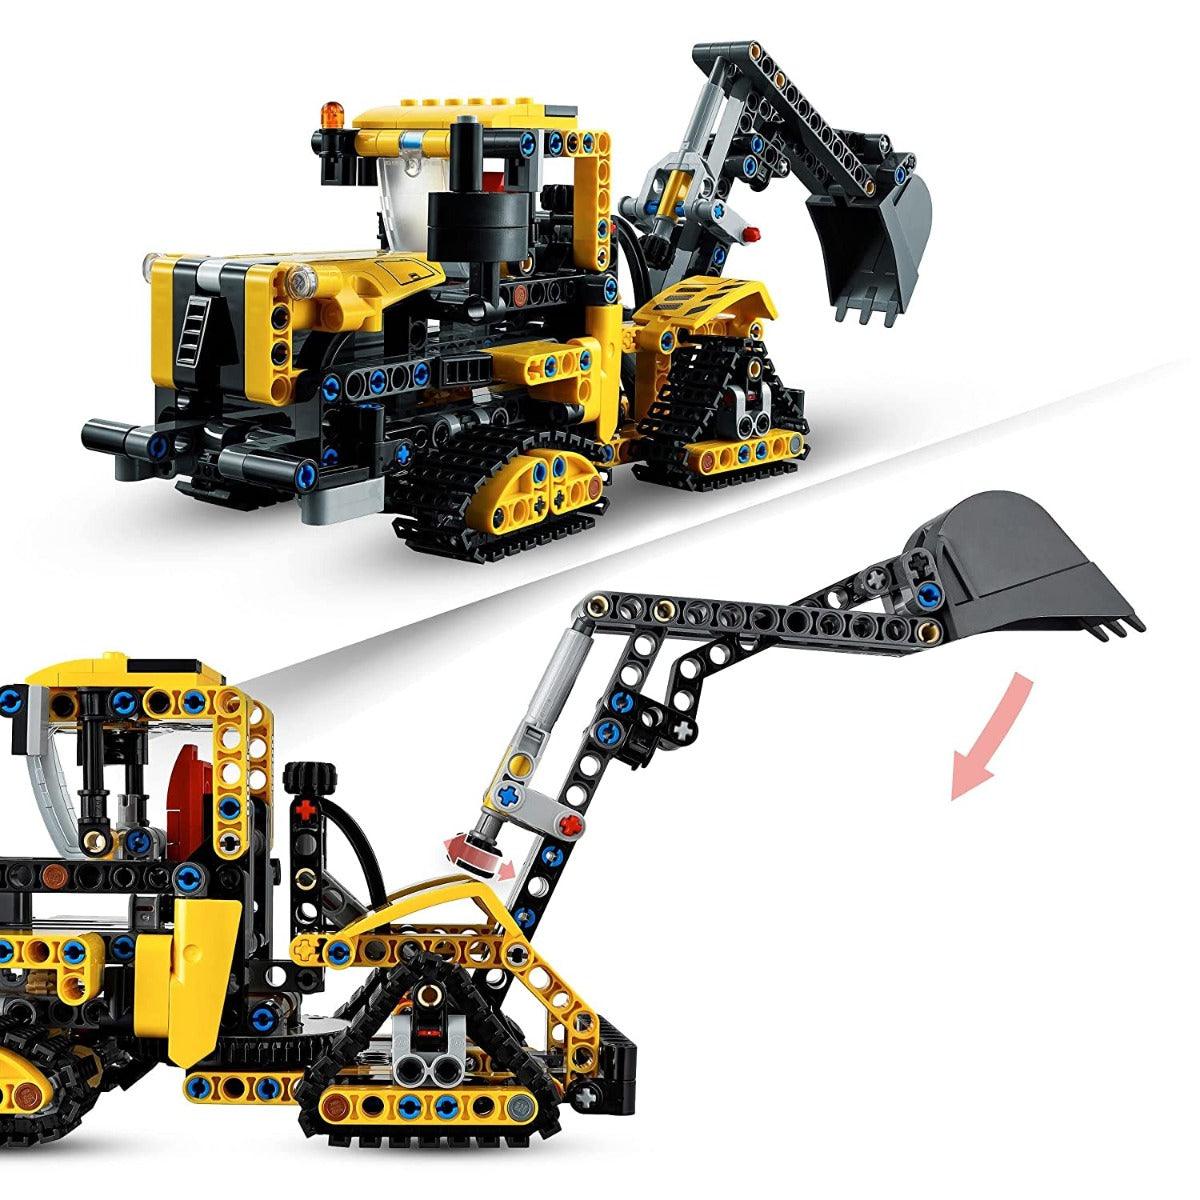 Lego Technic Heavy-Duty 2in1 Excavator Building Kit for Ages 8+